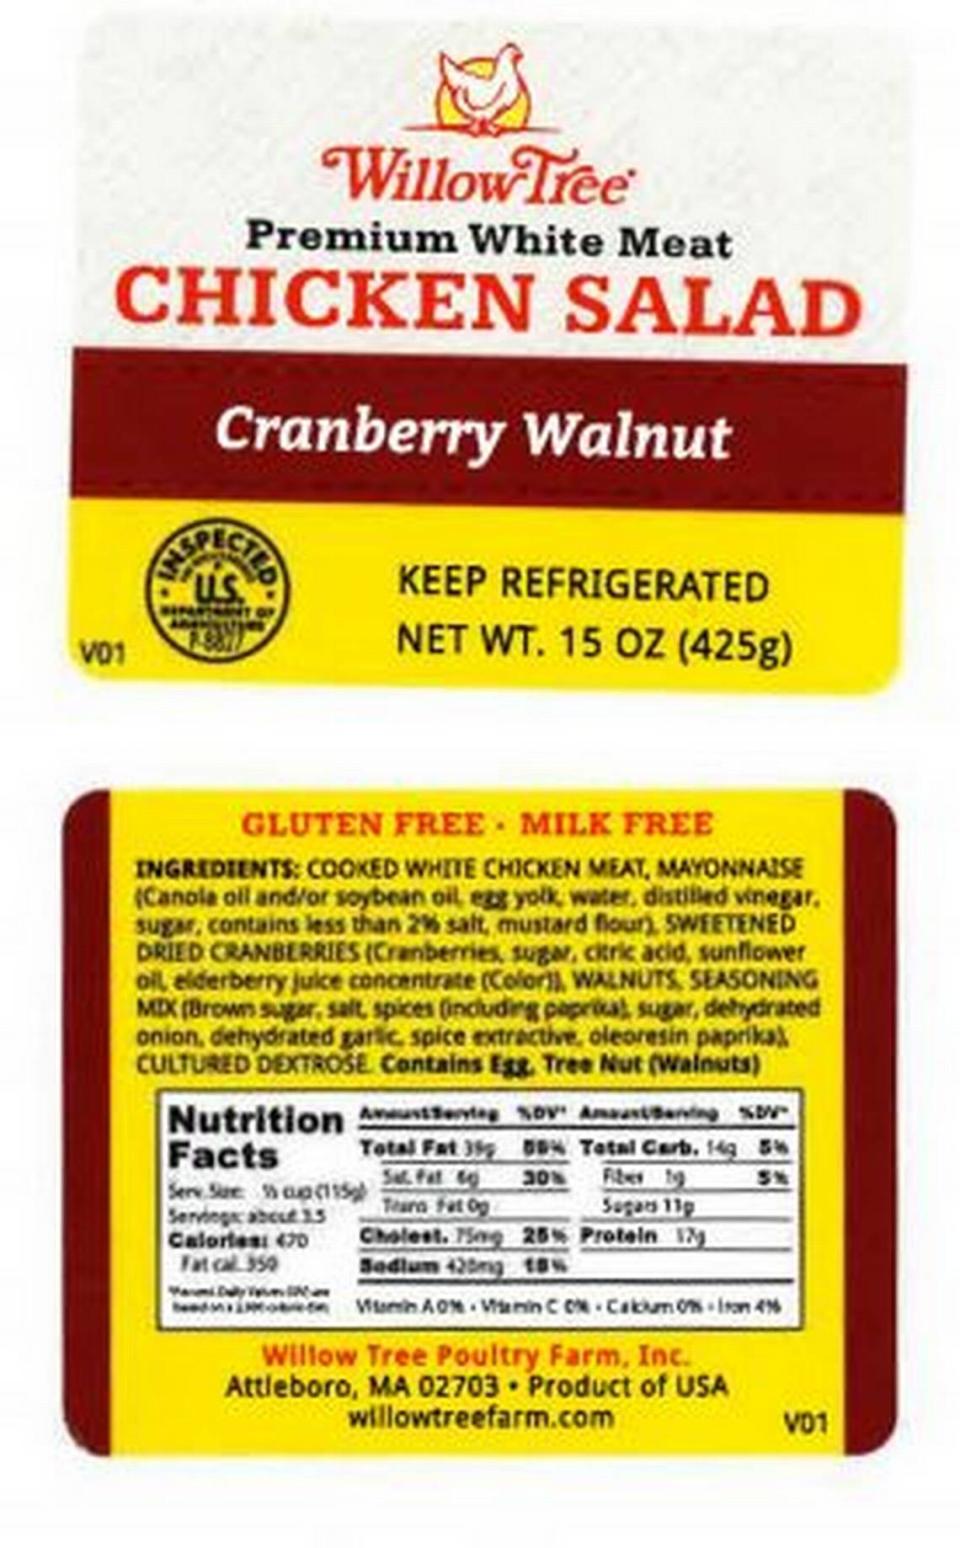 The label that should appear on the container when what’s inside is Willow Tree Premium White Mean Cranberry Walnut Chicken Salad.